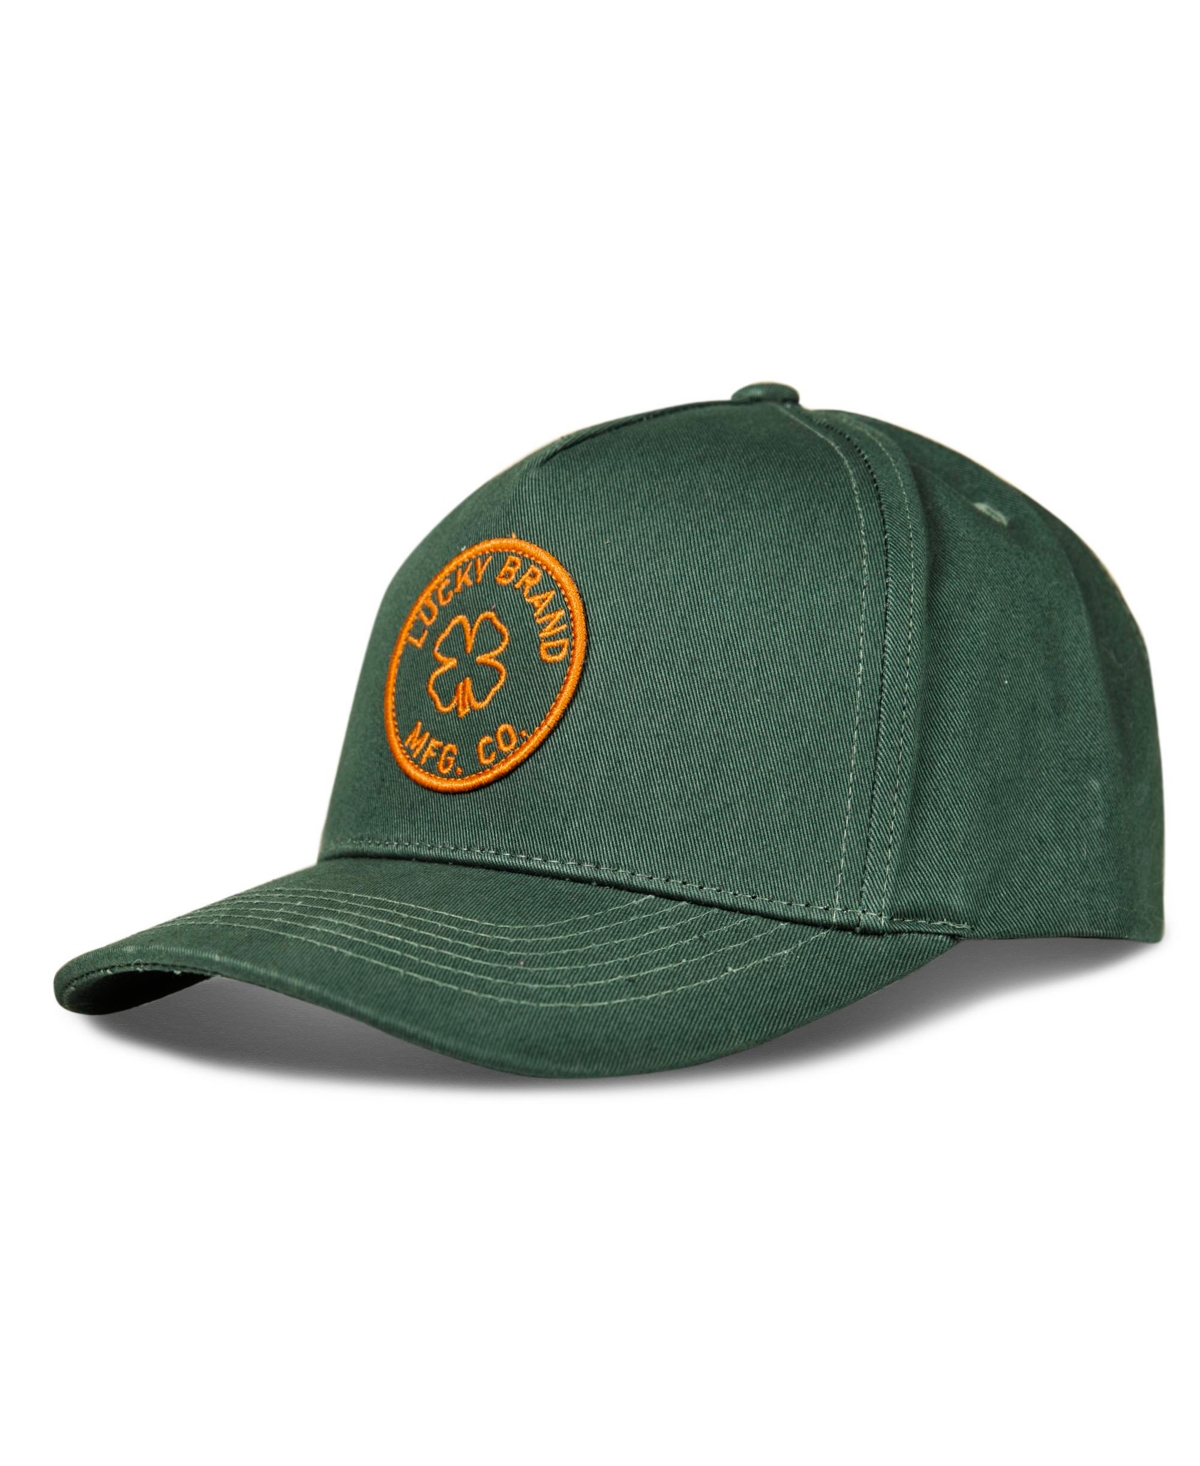 Lucky Brand Women's Mfg Co. Patch Hat In Forest